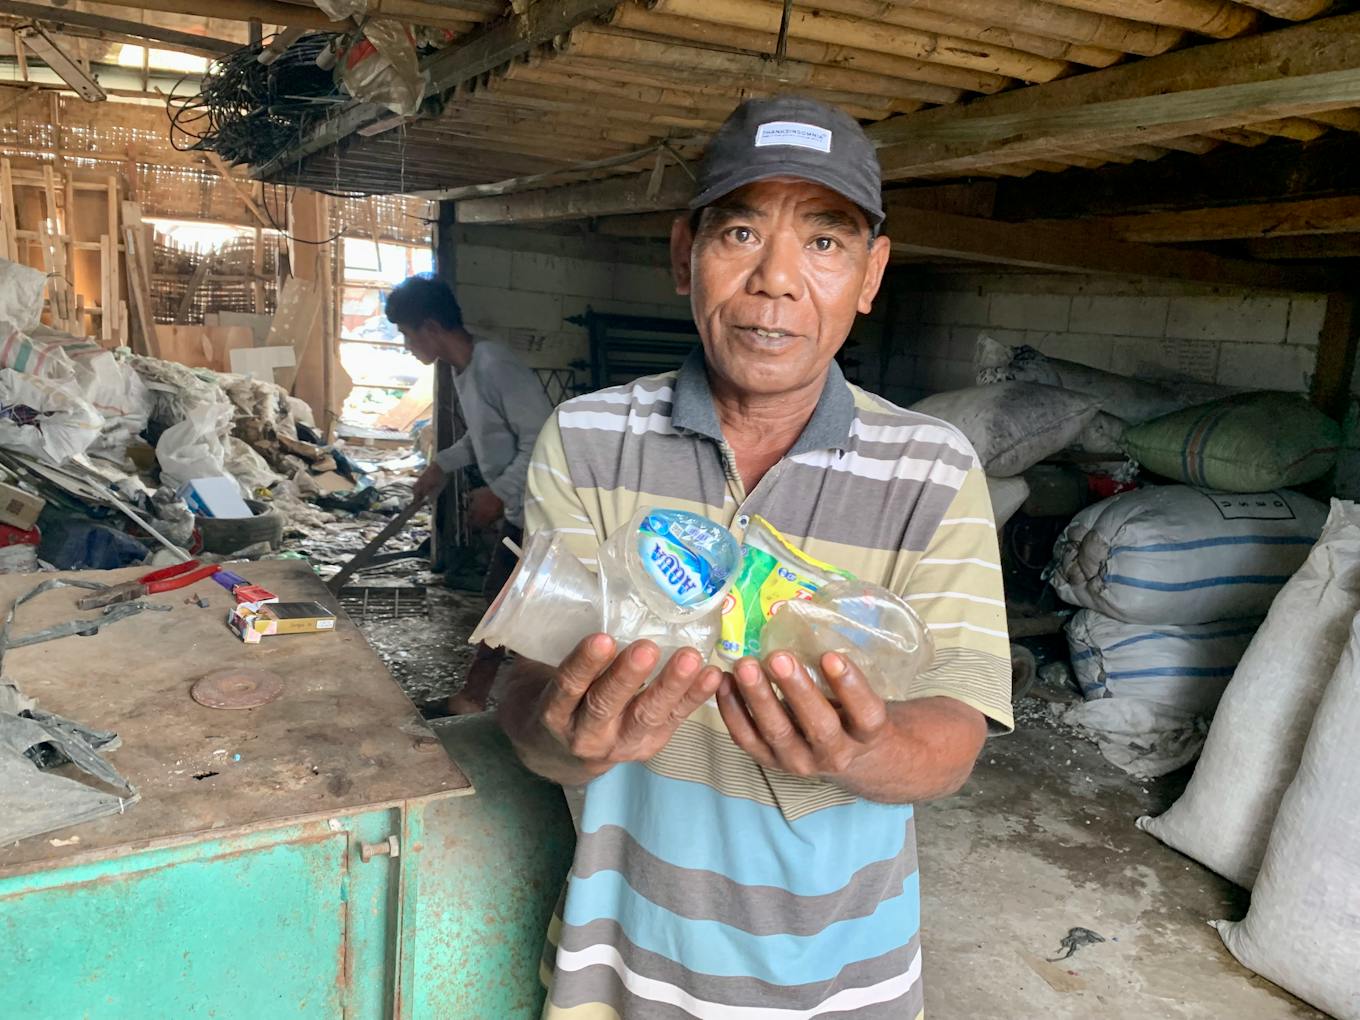 Casnadi, Indonesian waste picker from Bantan